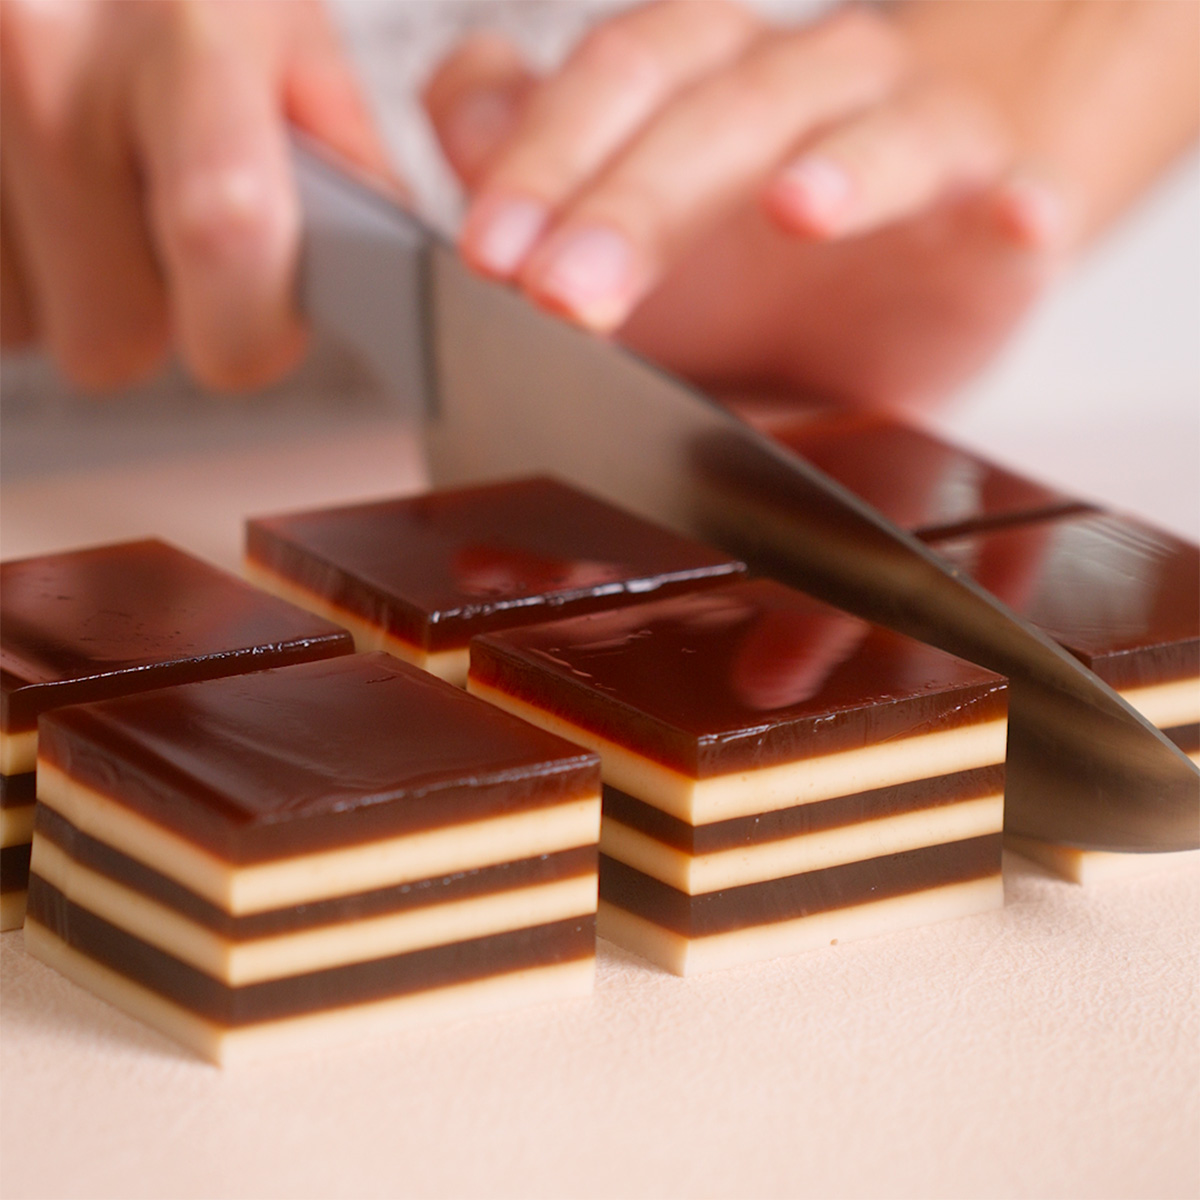 Slicing the coffee jelly into bite-sized pieces.